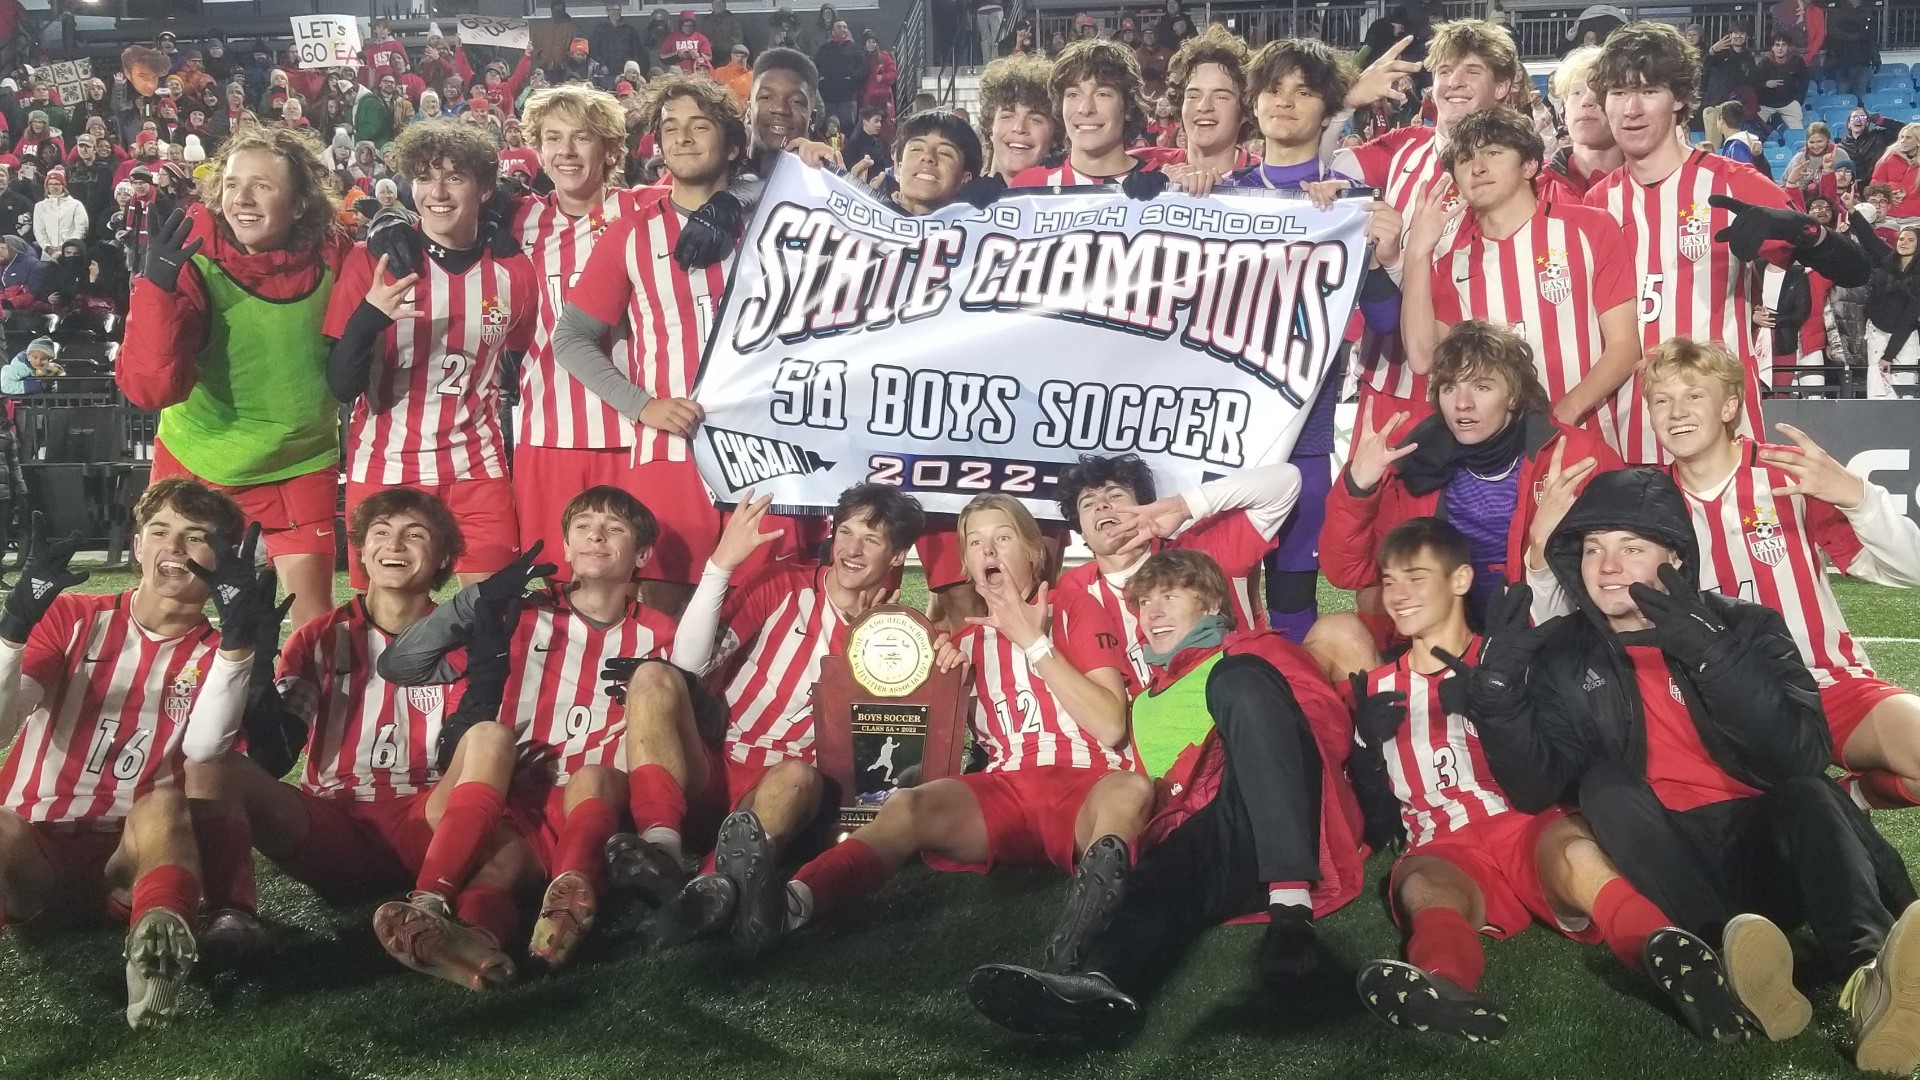 The Angels blanked the Knights 1-0 on Saturday to capture the Class 5A state title.